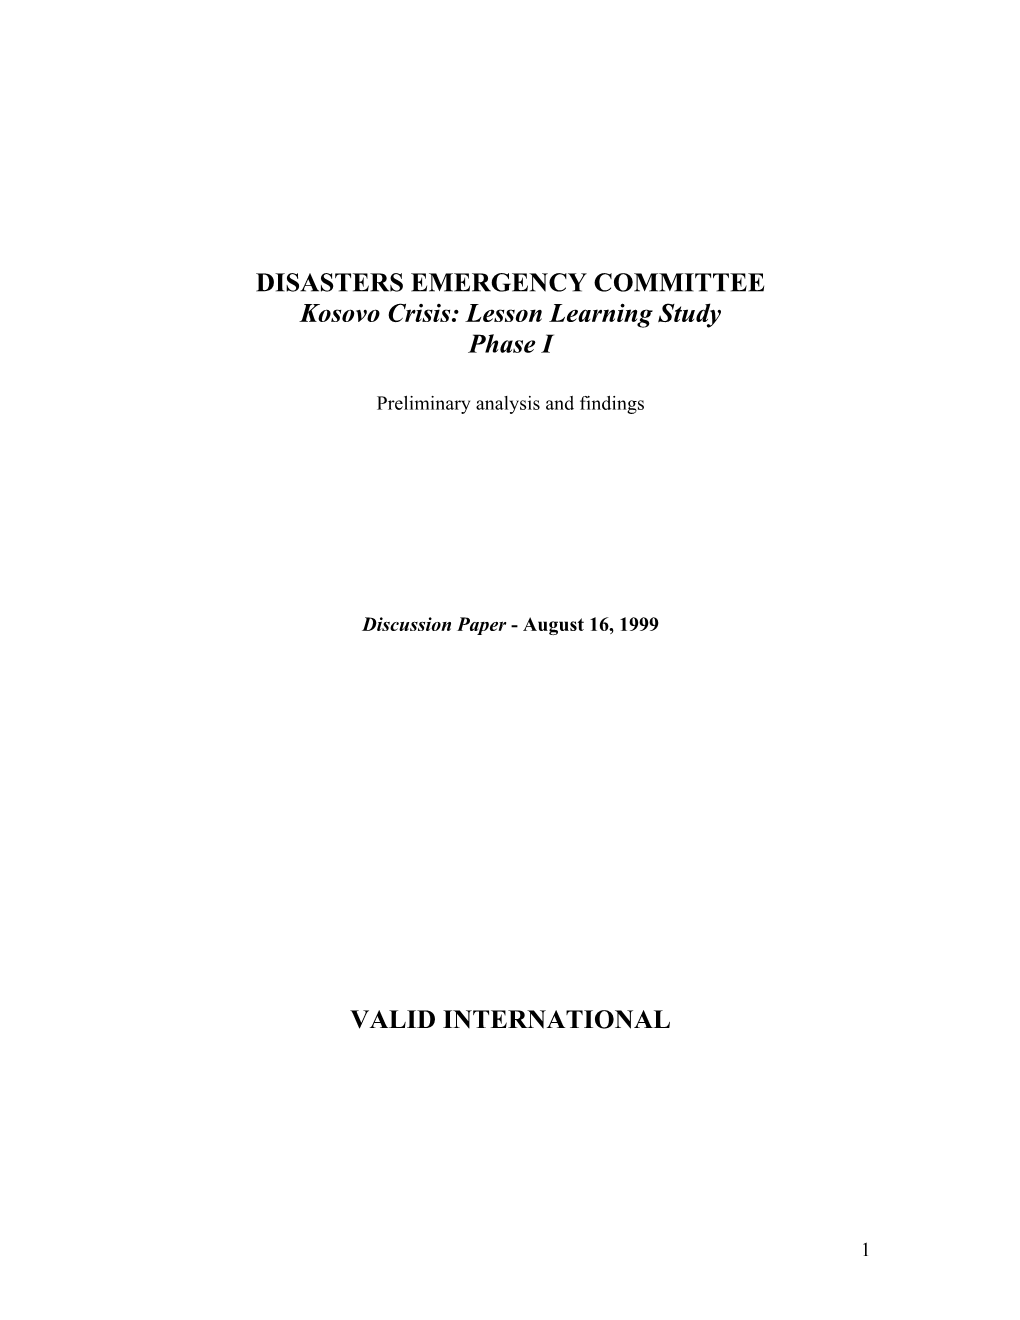 DISASTERS EMERGENCY COMMITTEE Kosovo Crisis: Lesson Learning Study Phase I